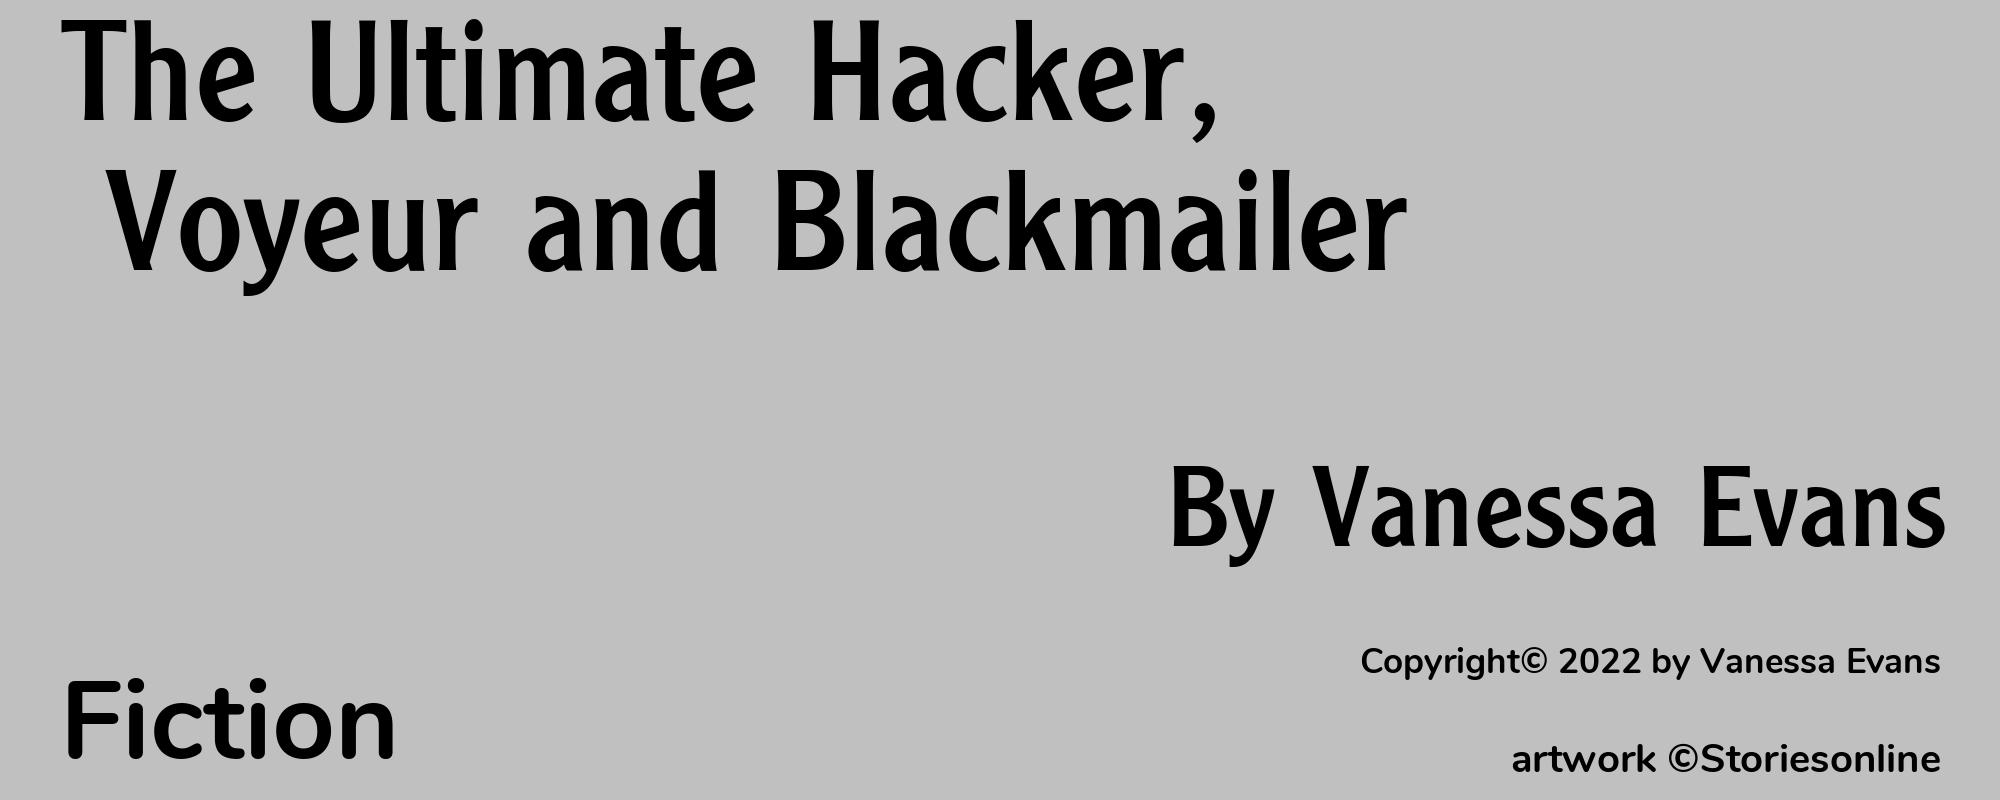 The Ultimate Hacker, Voyeur and Blackmailer - Cover